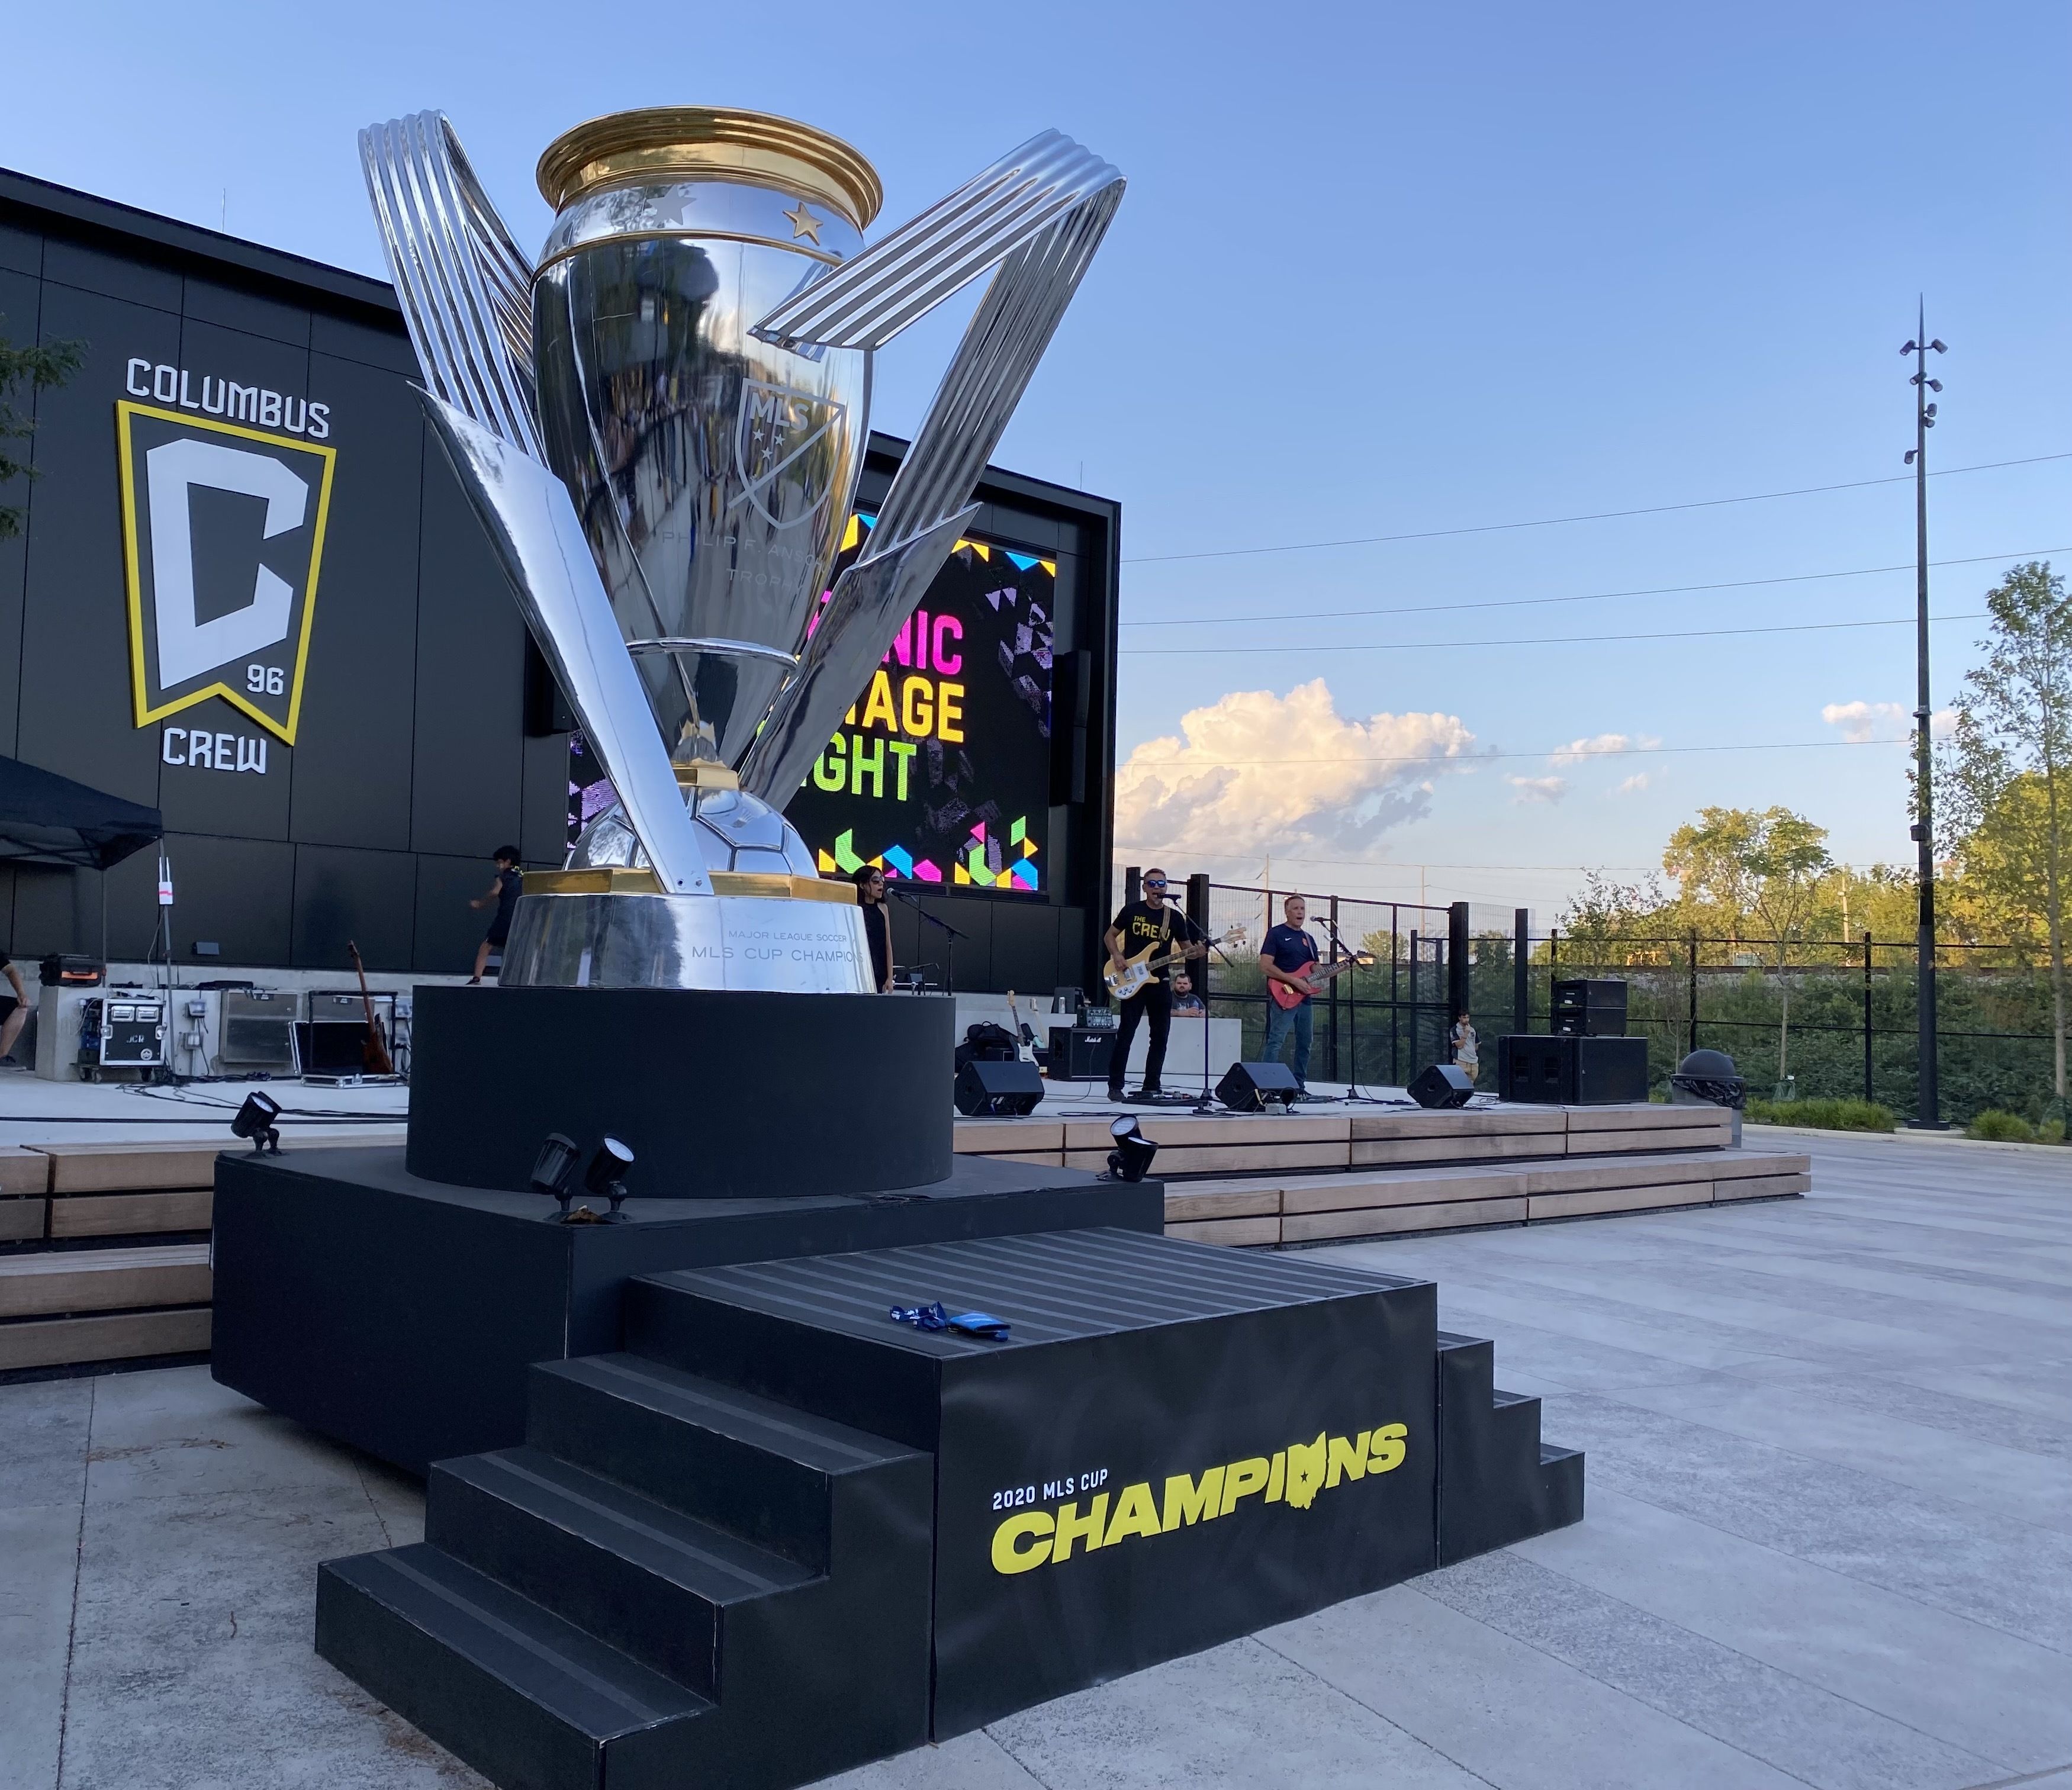 A large-sized trophy on display outside the Columbus Crew MLS stadium, with the word "Champions" written in front.